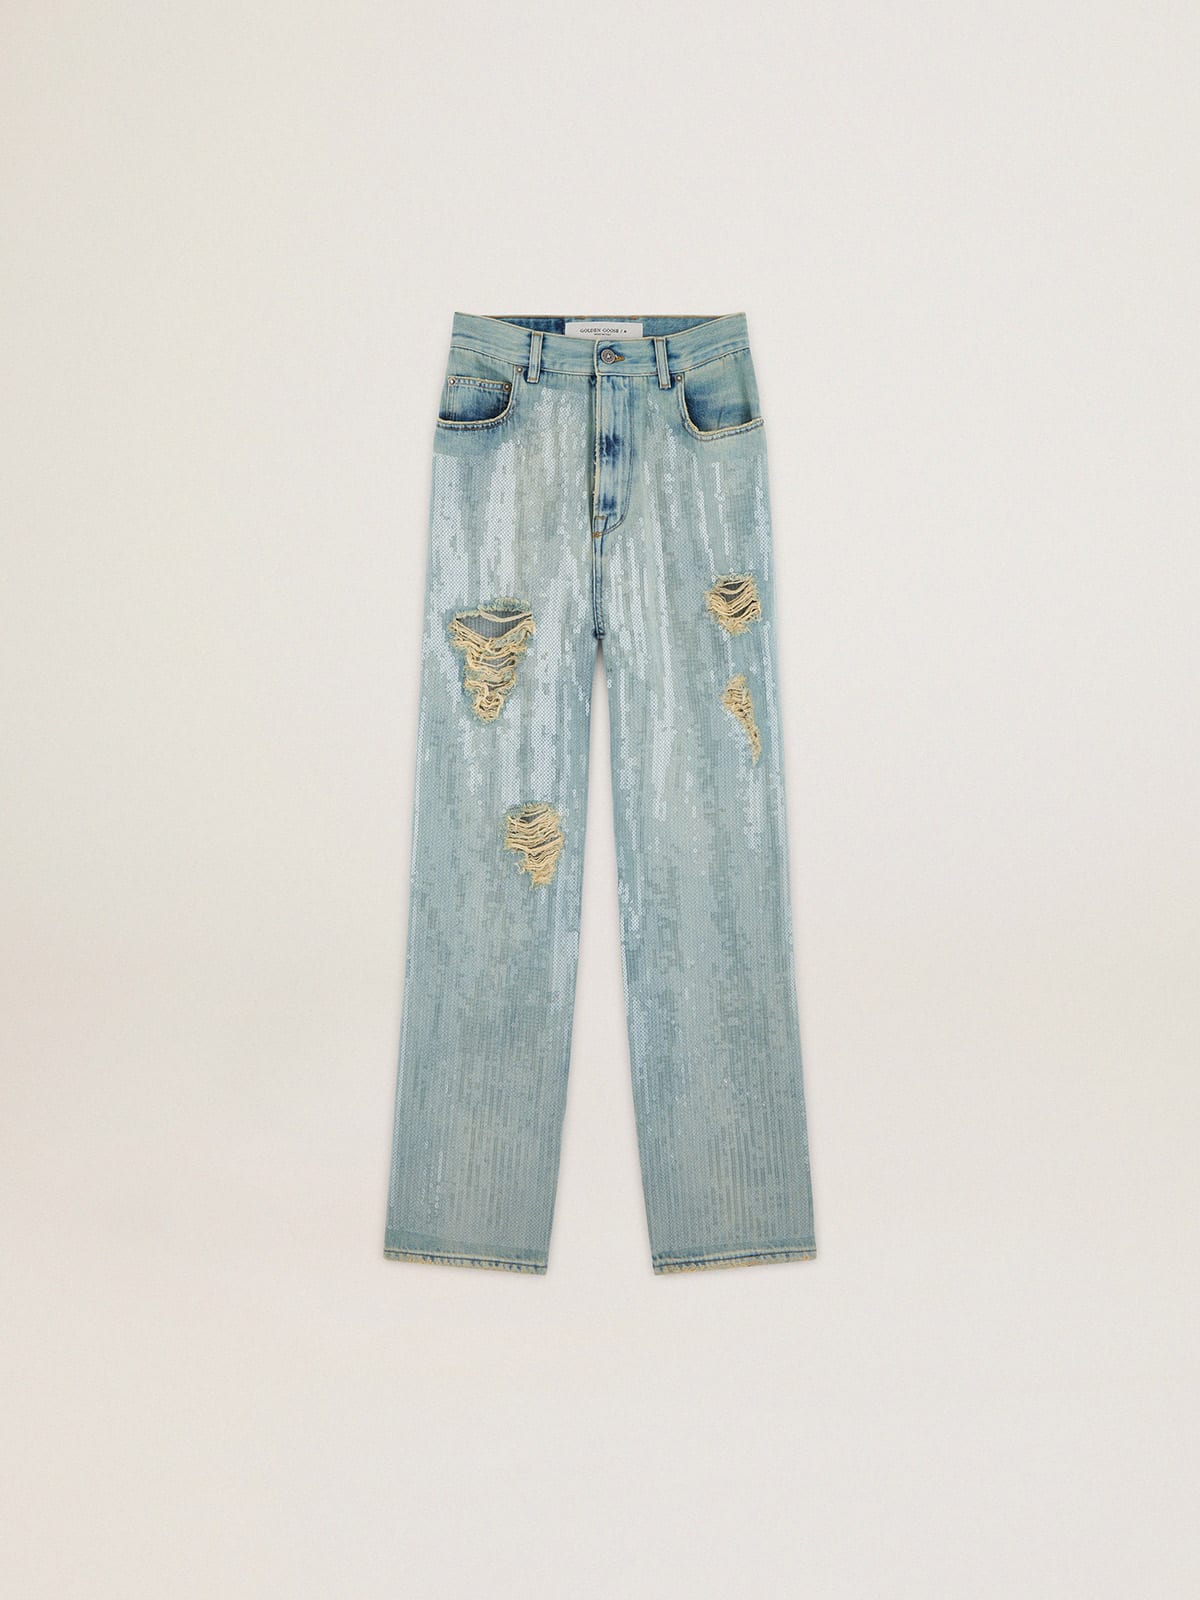 Golden Goose - Journey Collection jeans in distressed-effect light blue denim with all-over sequins in 